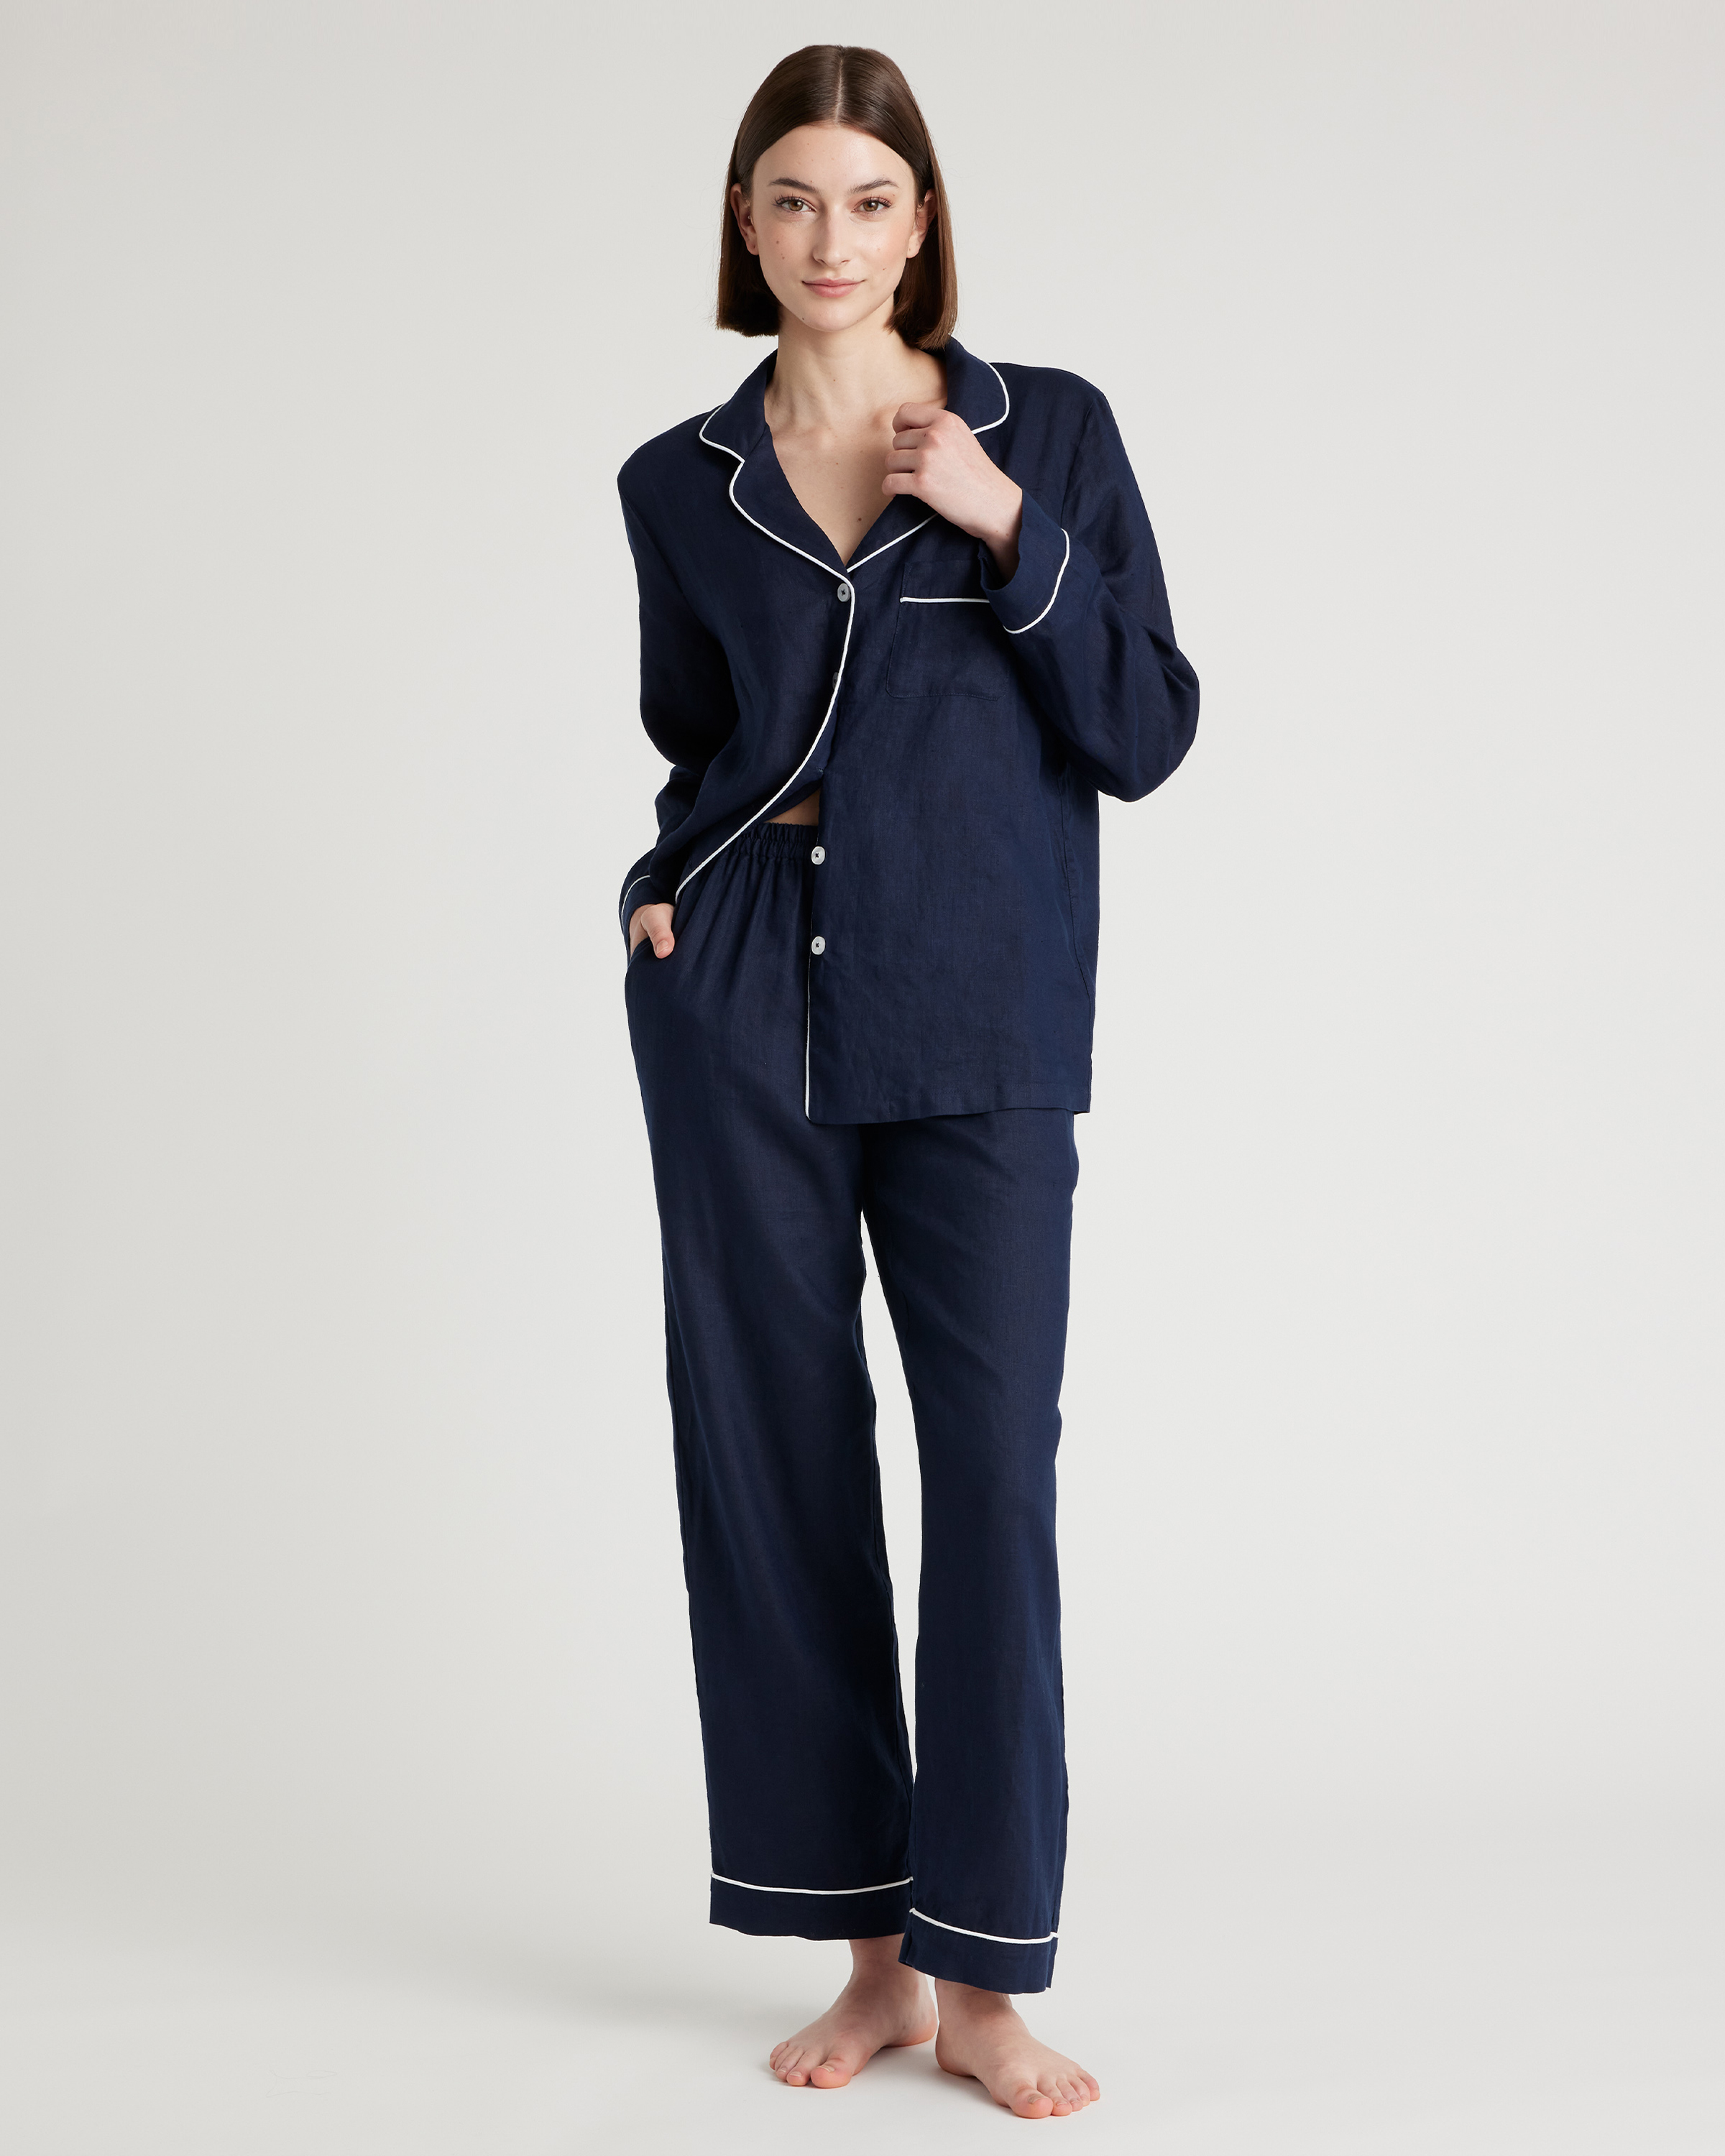 Quince Women's 100% European Linen Long Sleeve Pajama Set With Piping In Deep Navy